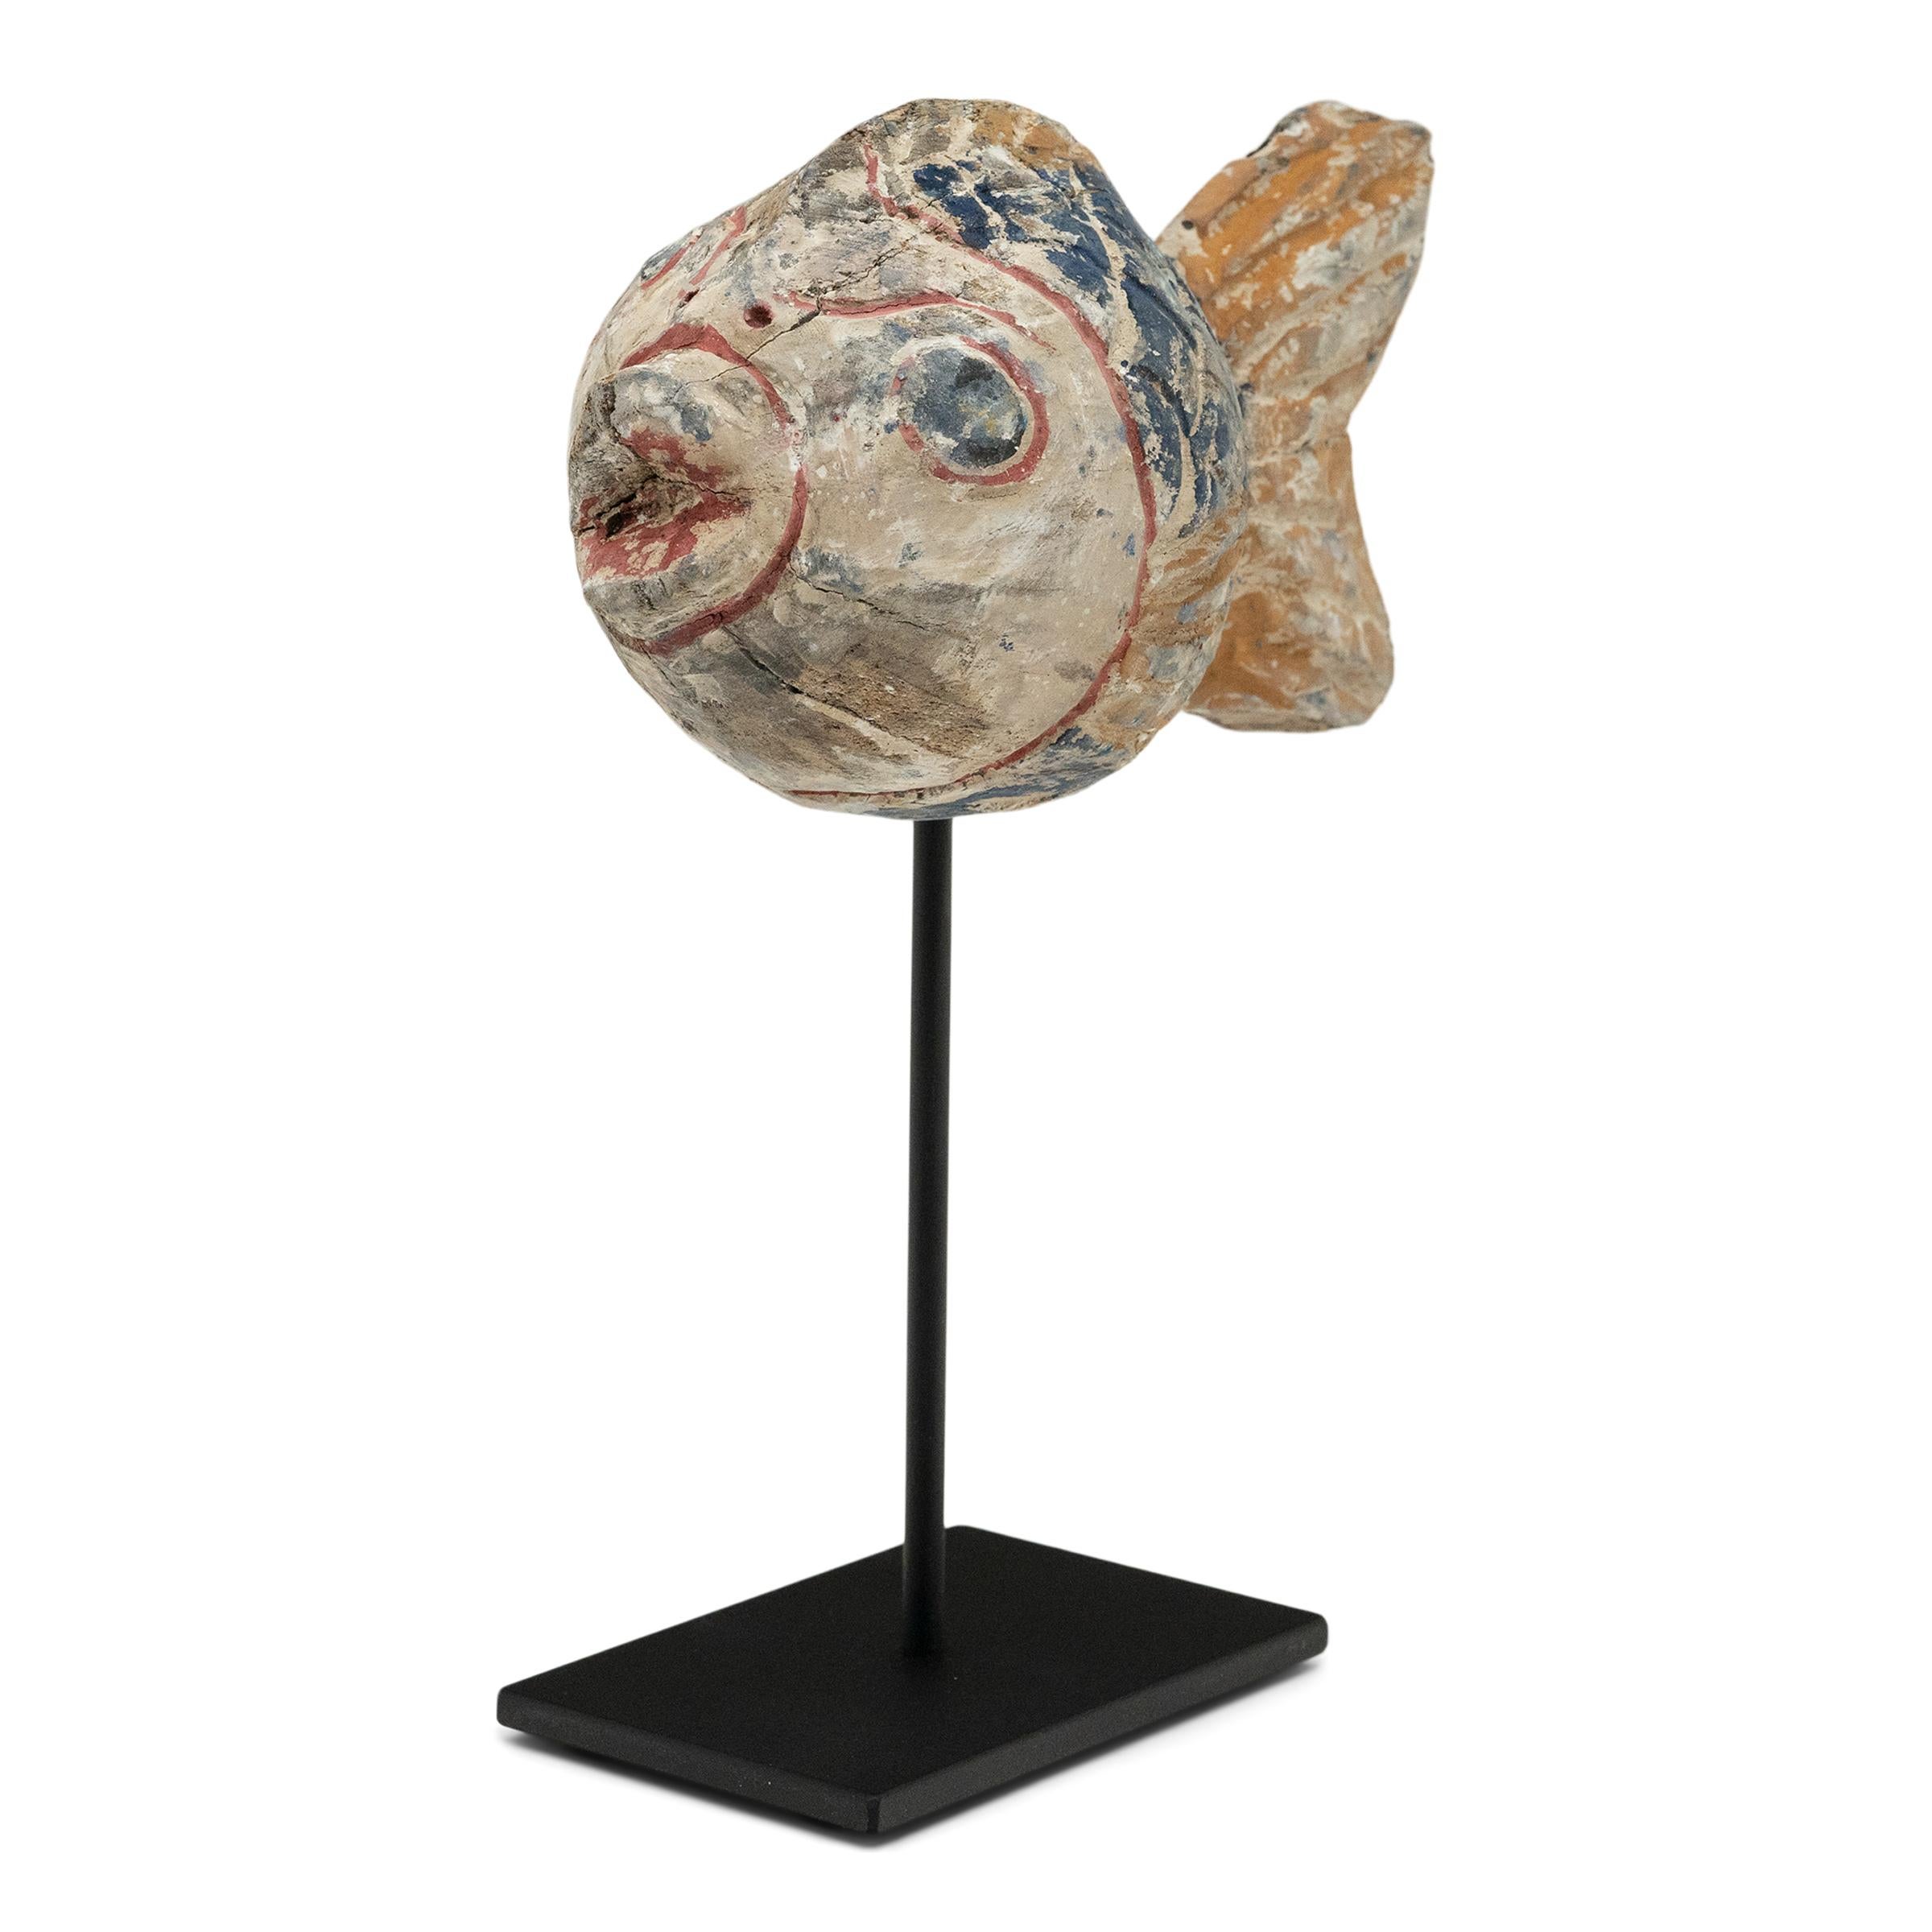 Hand-crafted from reclaimed wood, this artist-made koi is a traditional symbol of harmony and wealth. For Buddhists, such a fish represents a freedom from all restraints. The scales and fins on the squat, rounded body are highlighted with blue,